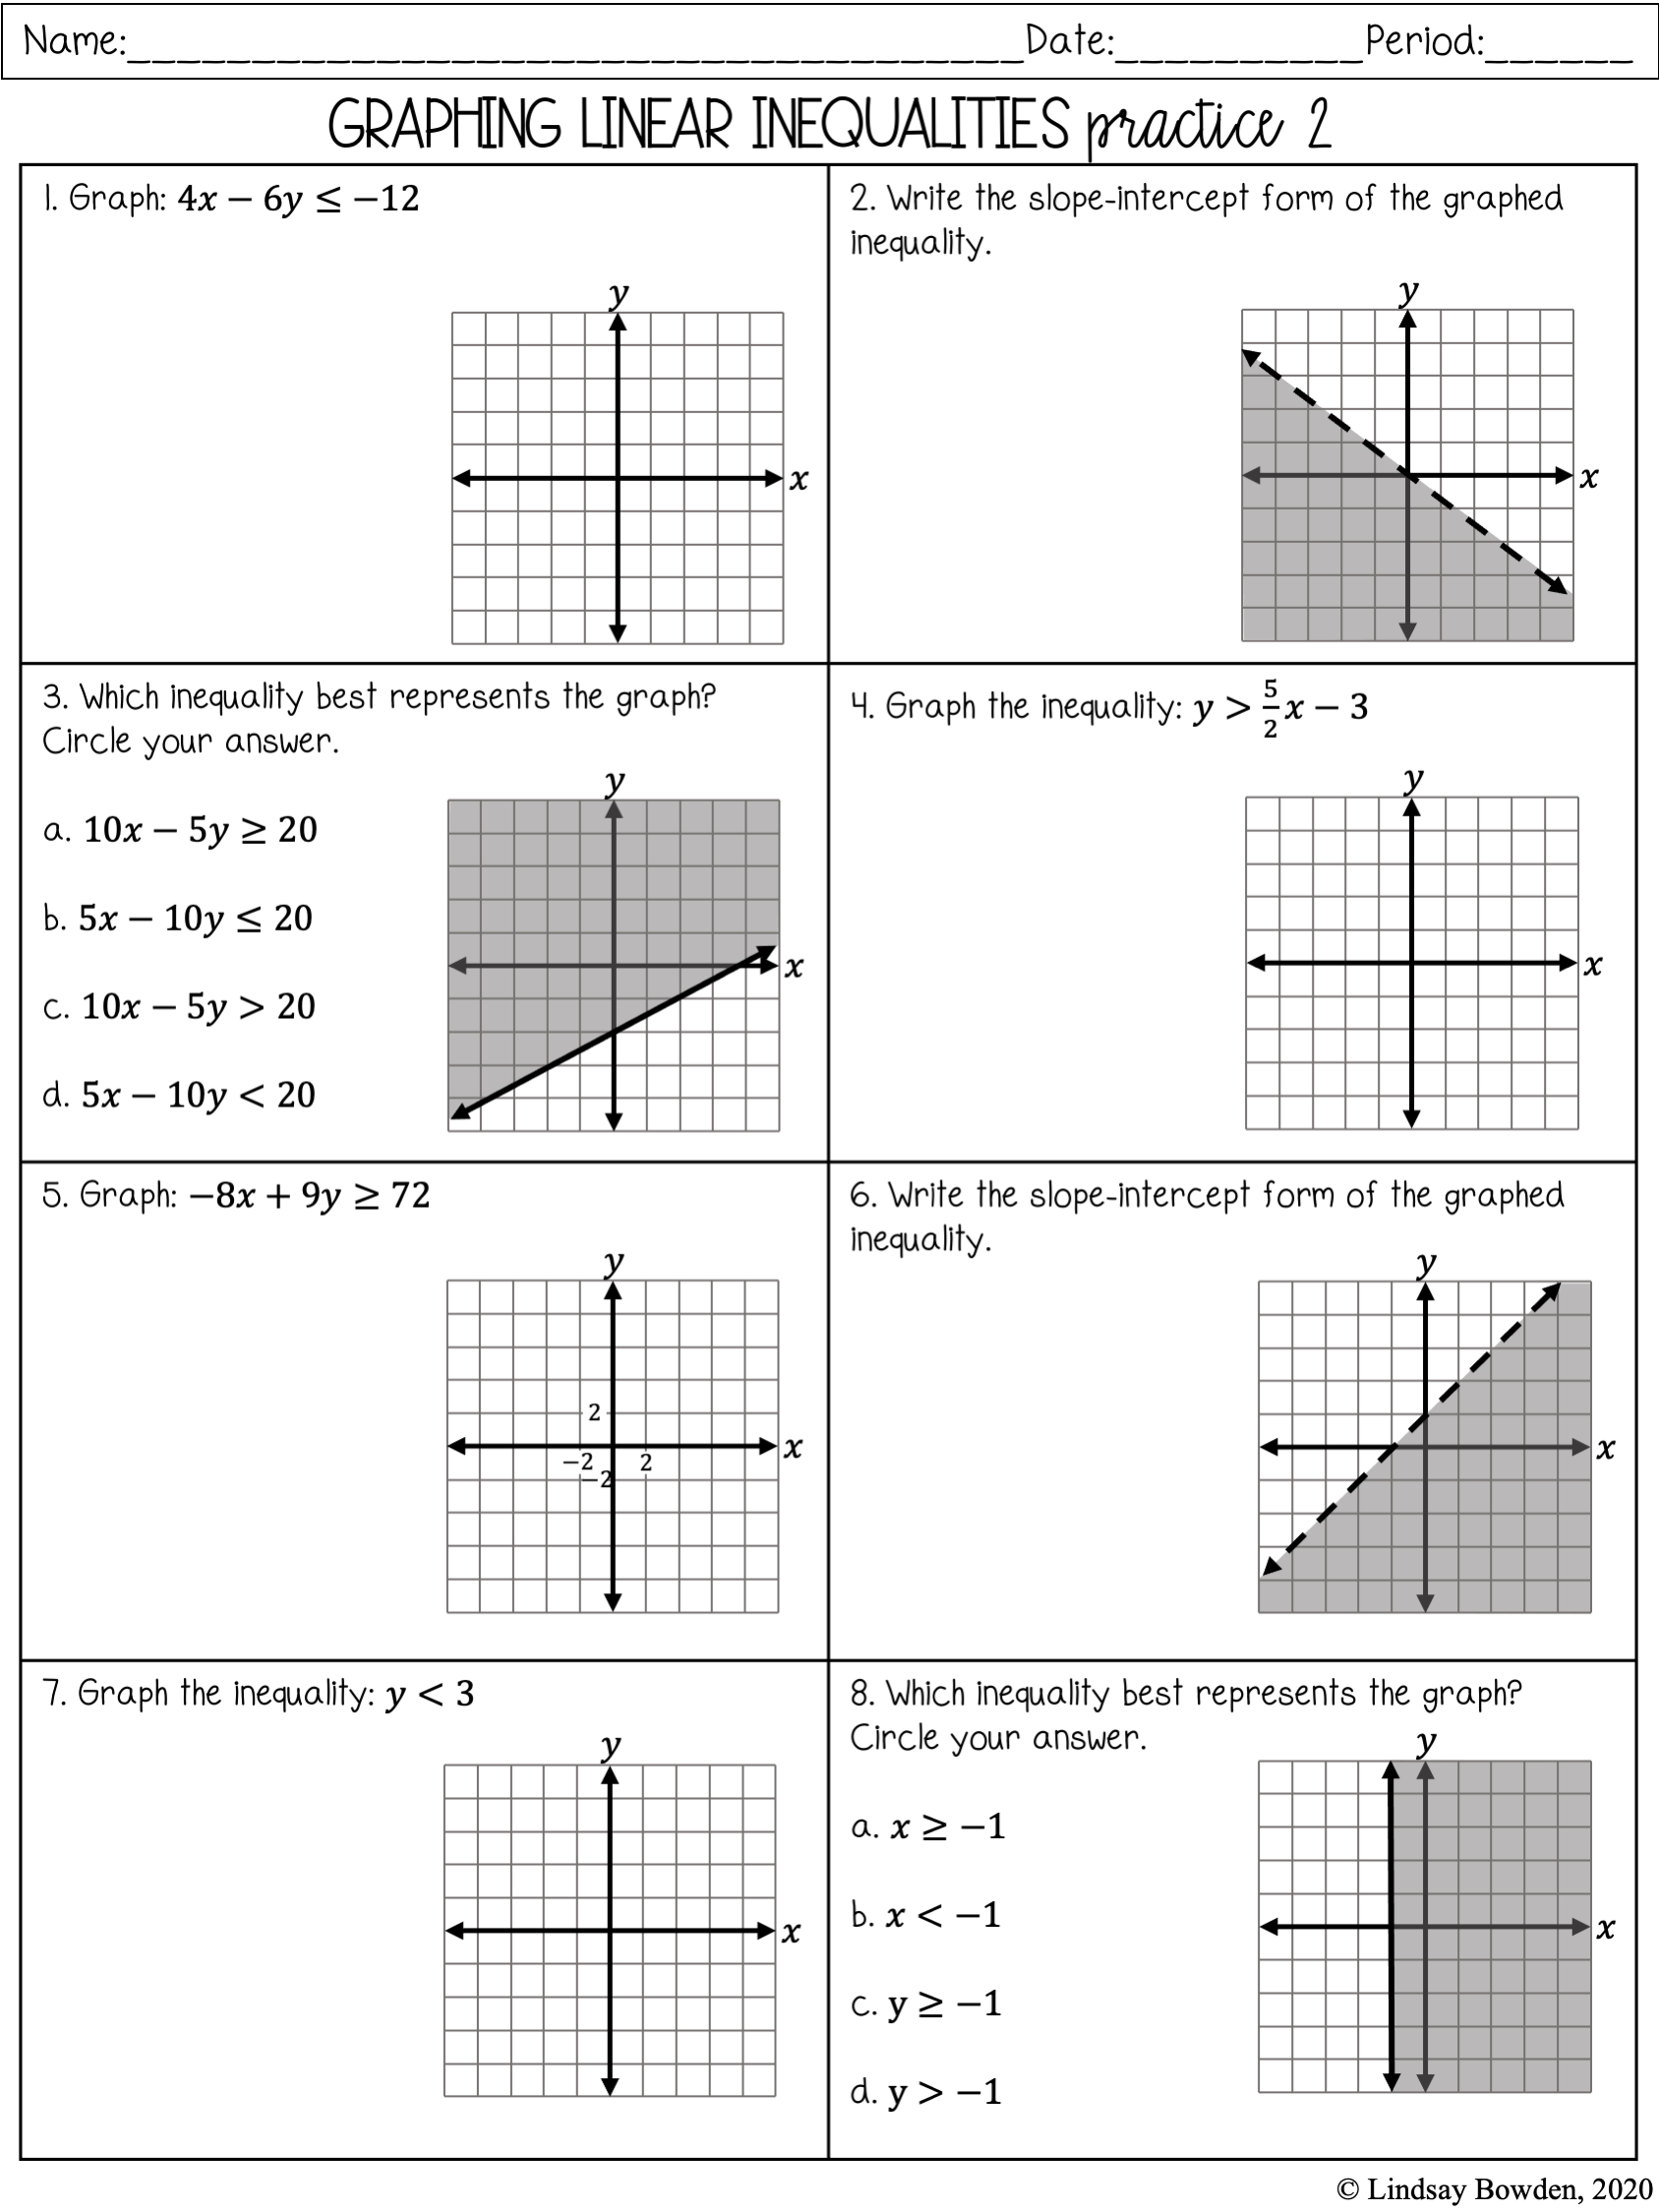 Linear Inequalities Notes and Worksheets - Lindsay Bowden Regarding Graphing Linear Inequalities Worksheet